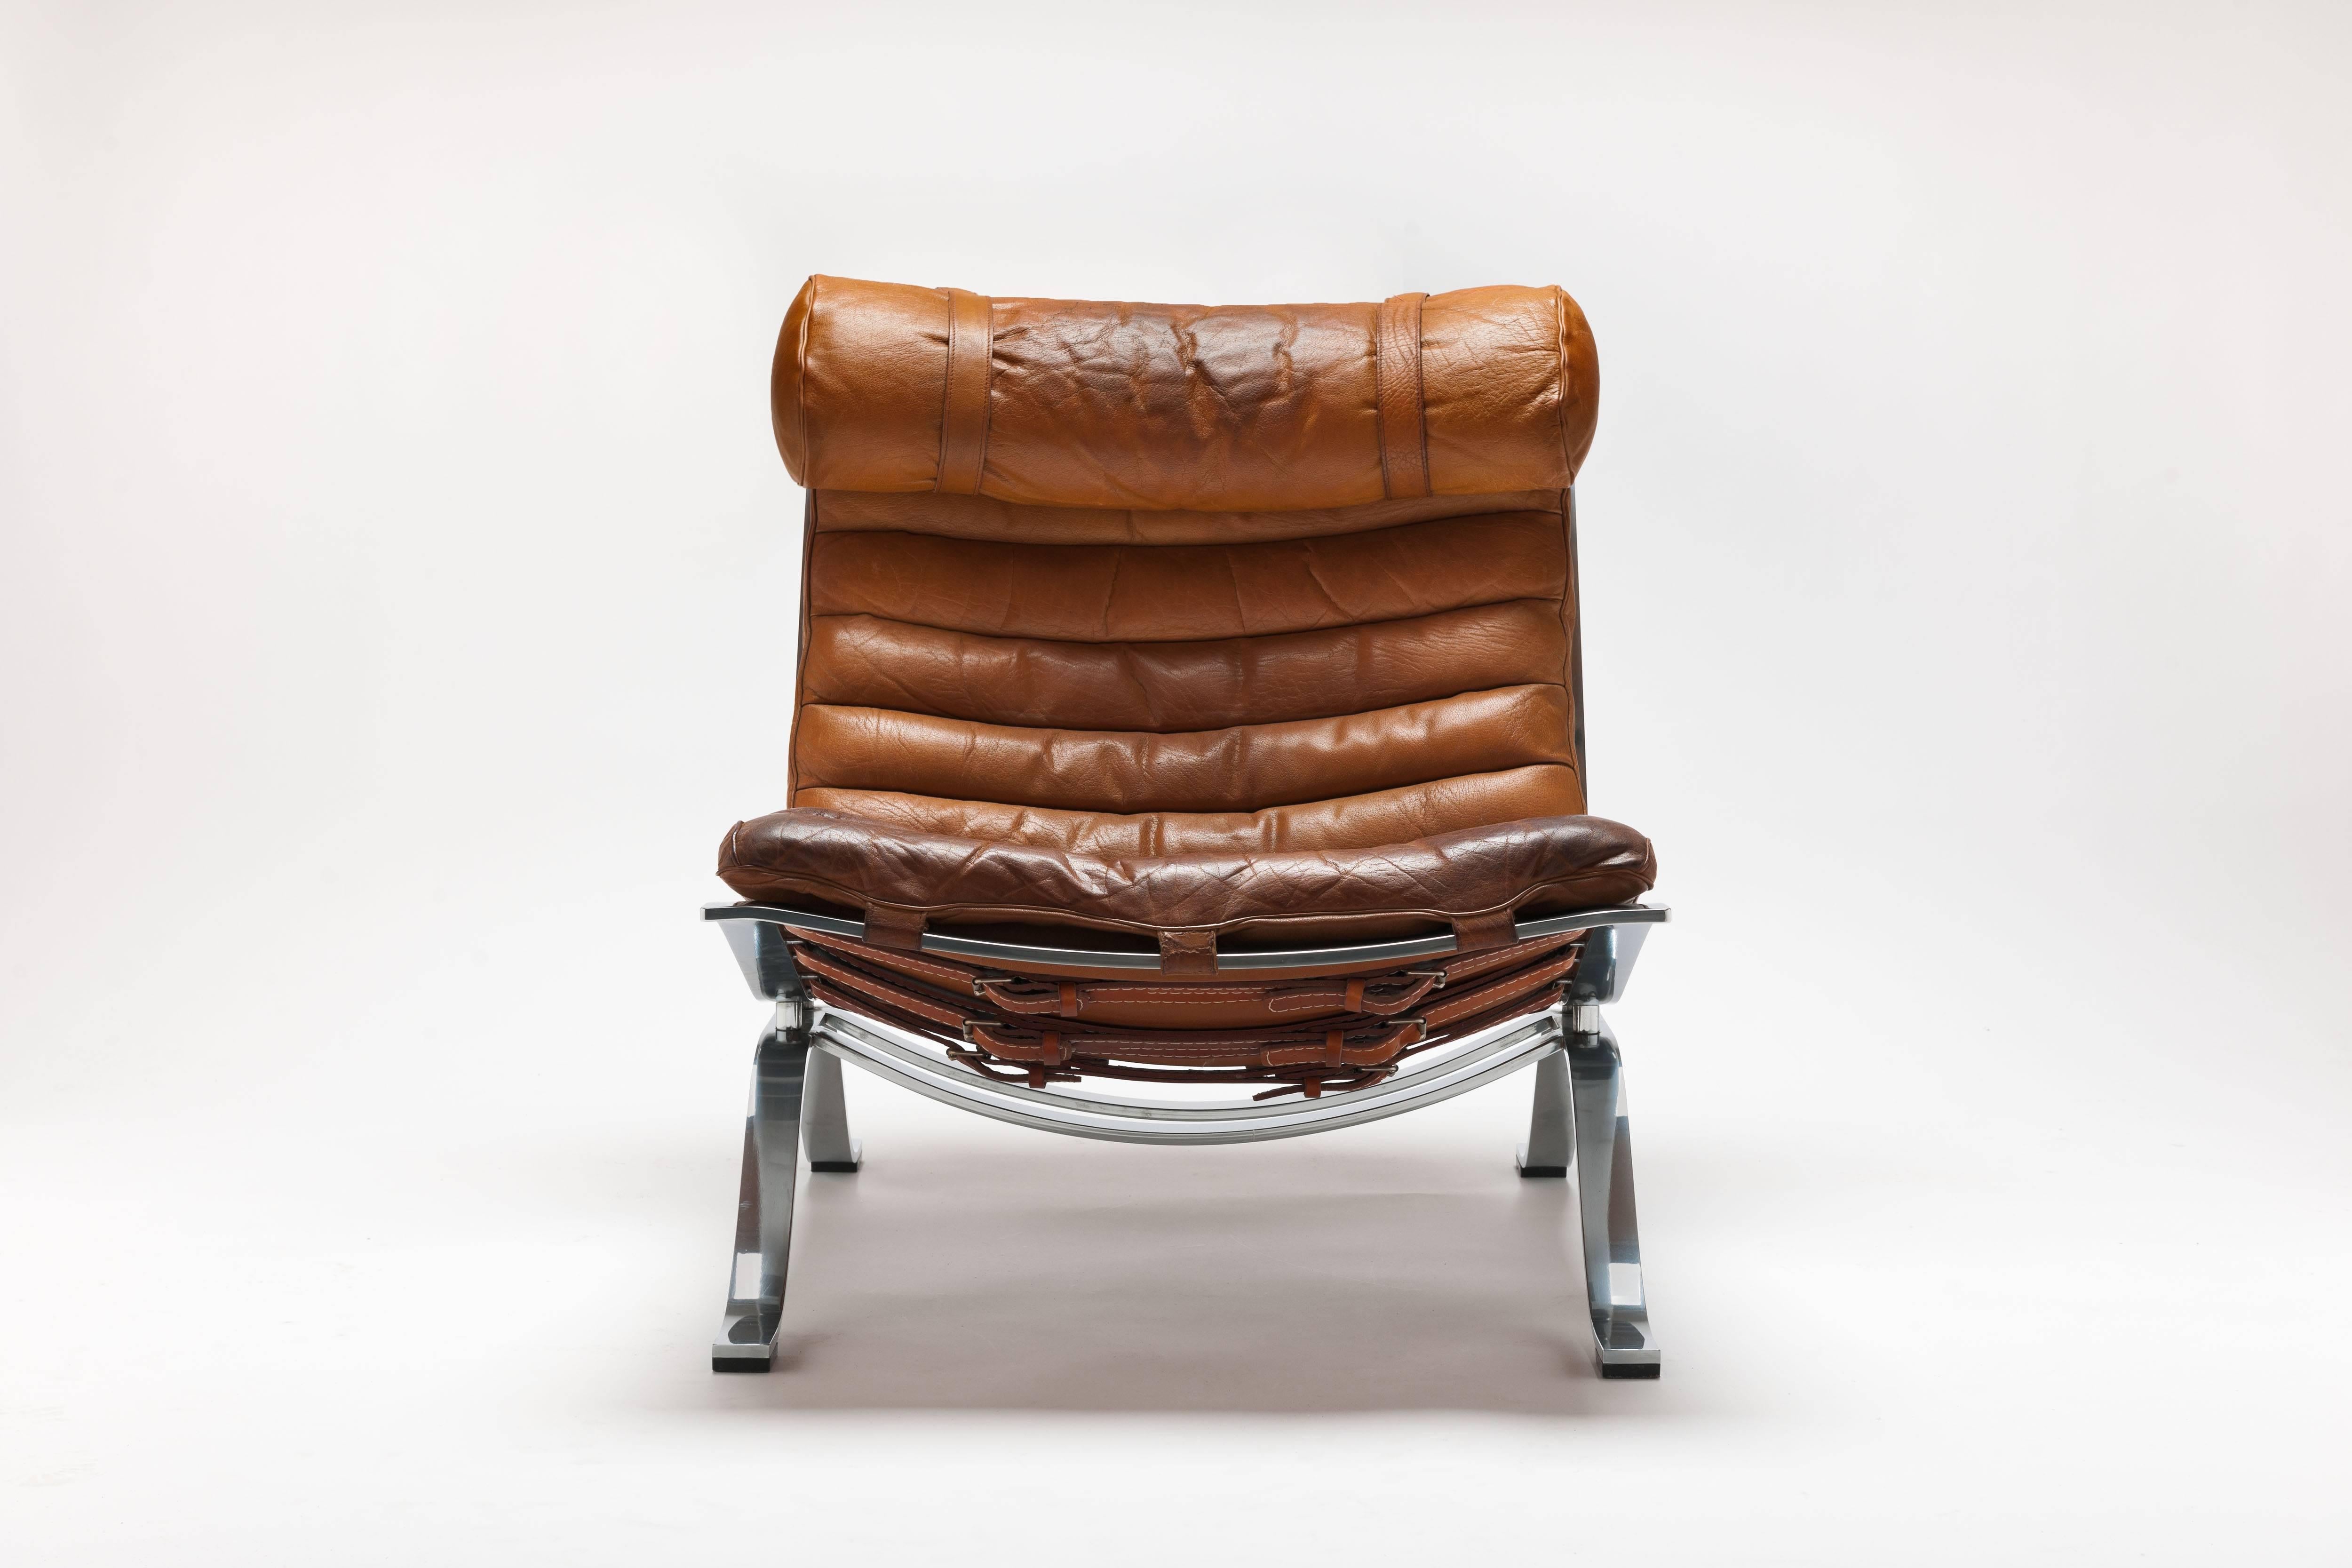 Original Buffalo leather 'Ari' lounge chair by Swedish designer Arne Norell for Norell Mobel. Designed in 1966 and awarded 